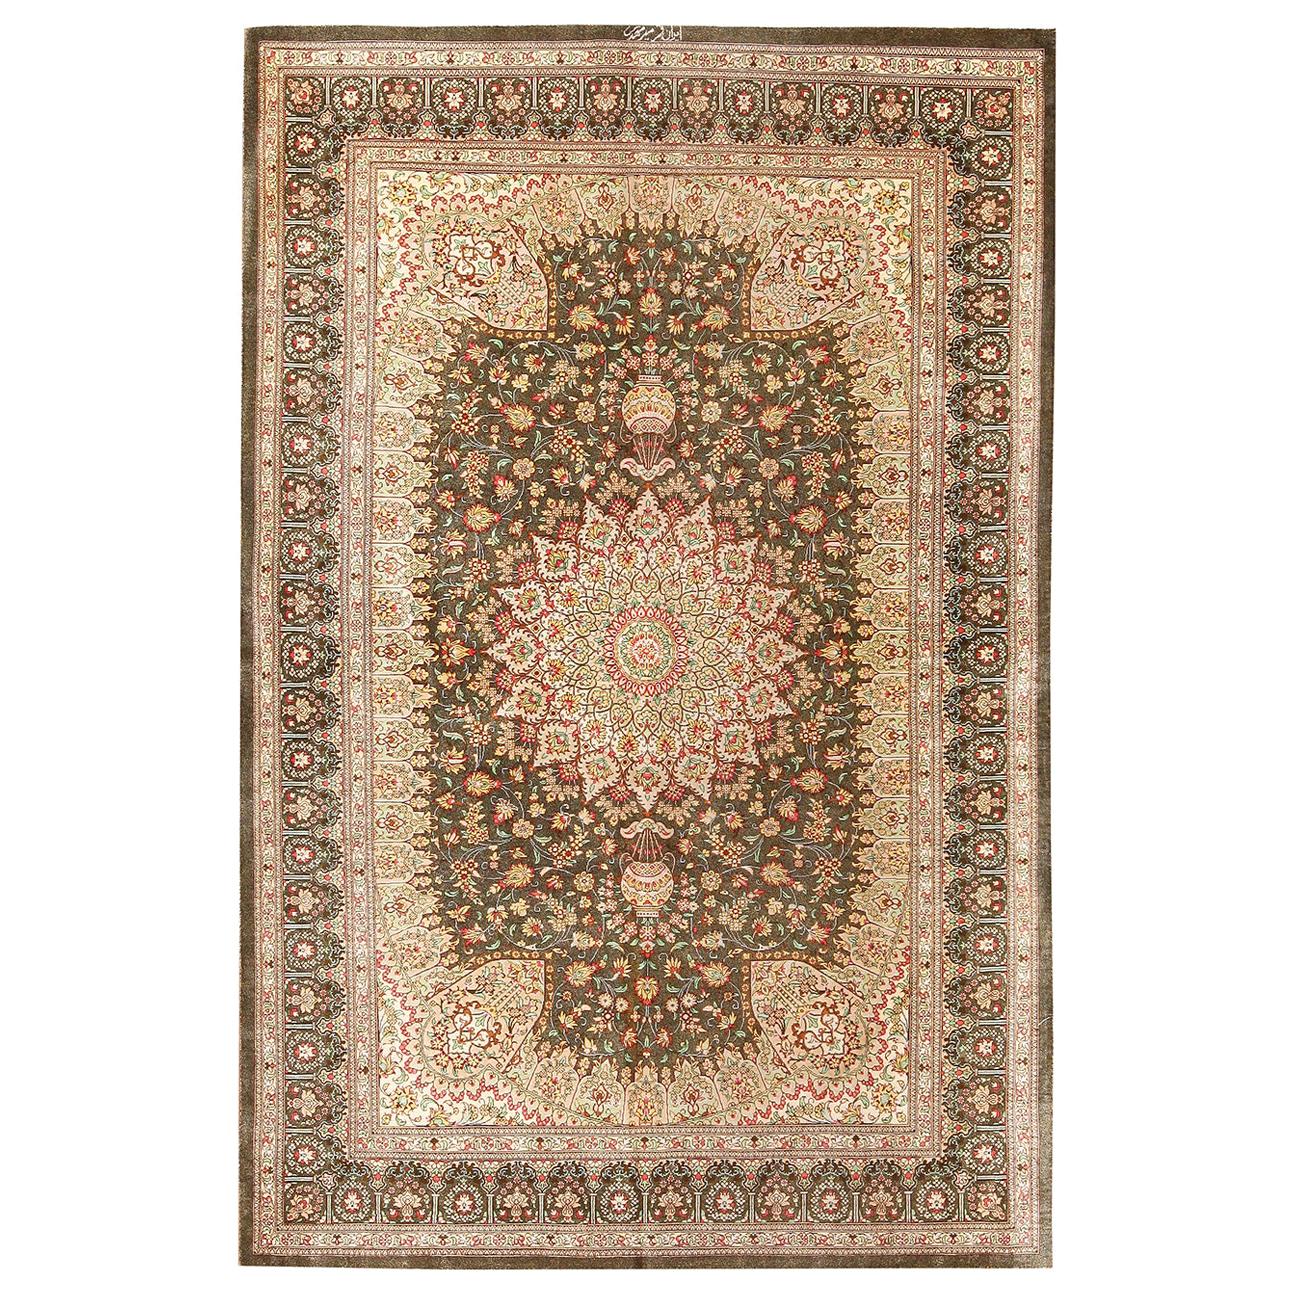 Nazmiyal Collection Silk Vintage Persian Qum Rug. 4 ft 4 in x 6 ft 6 in